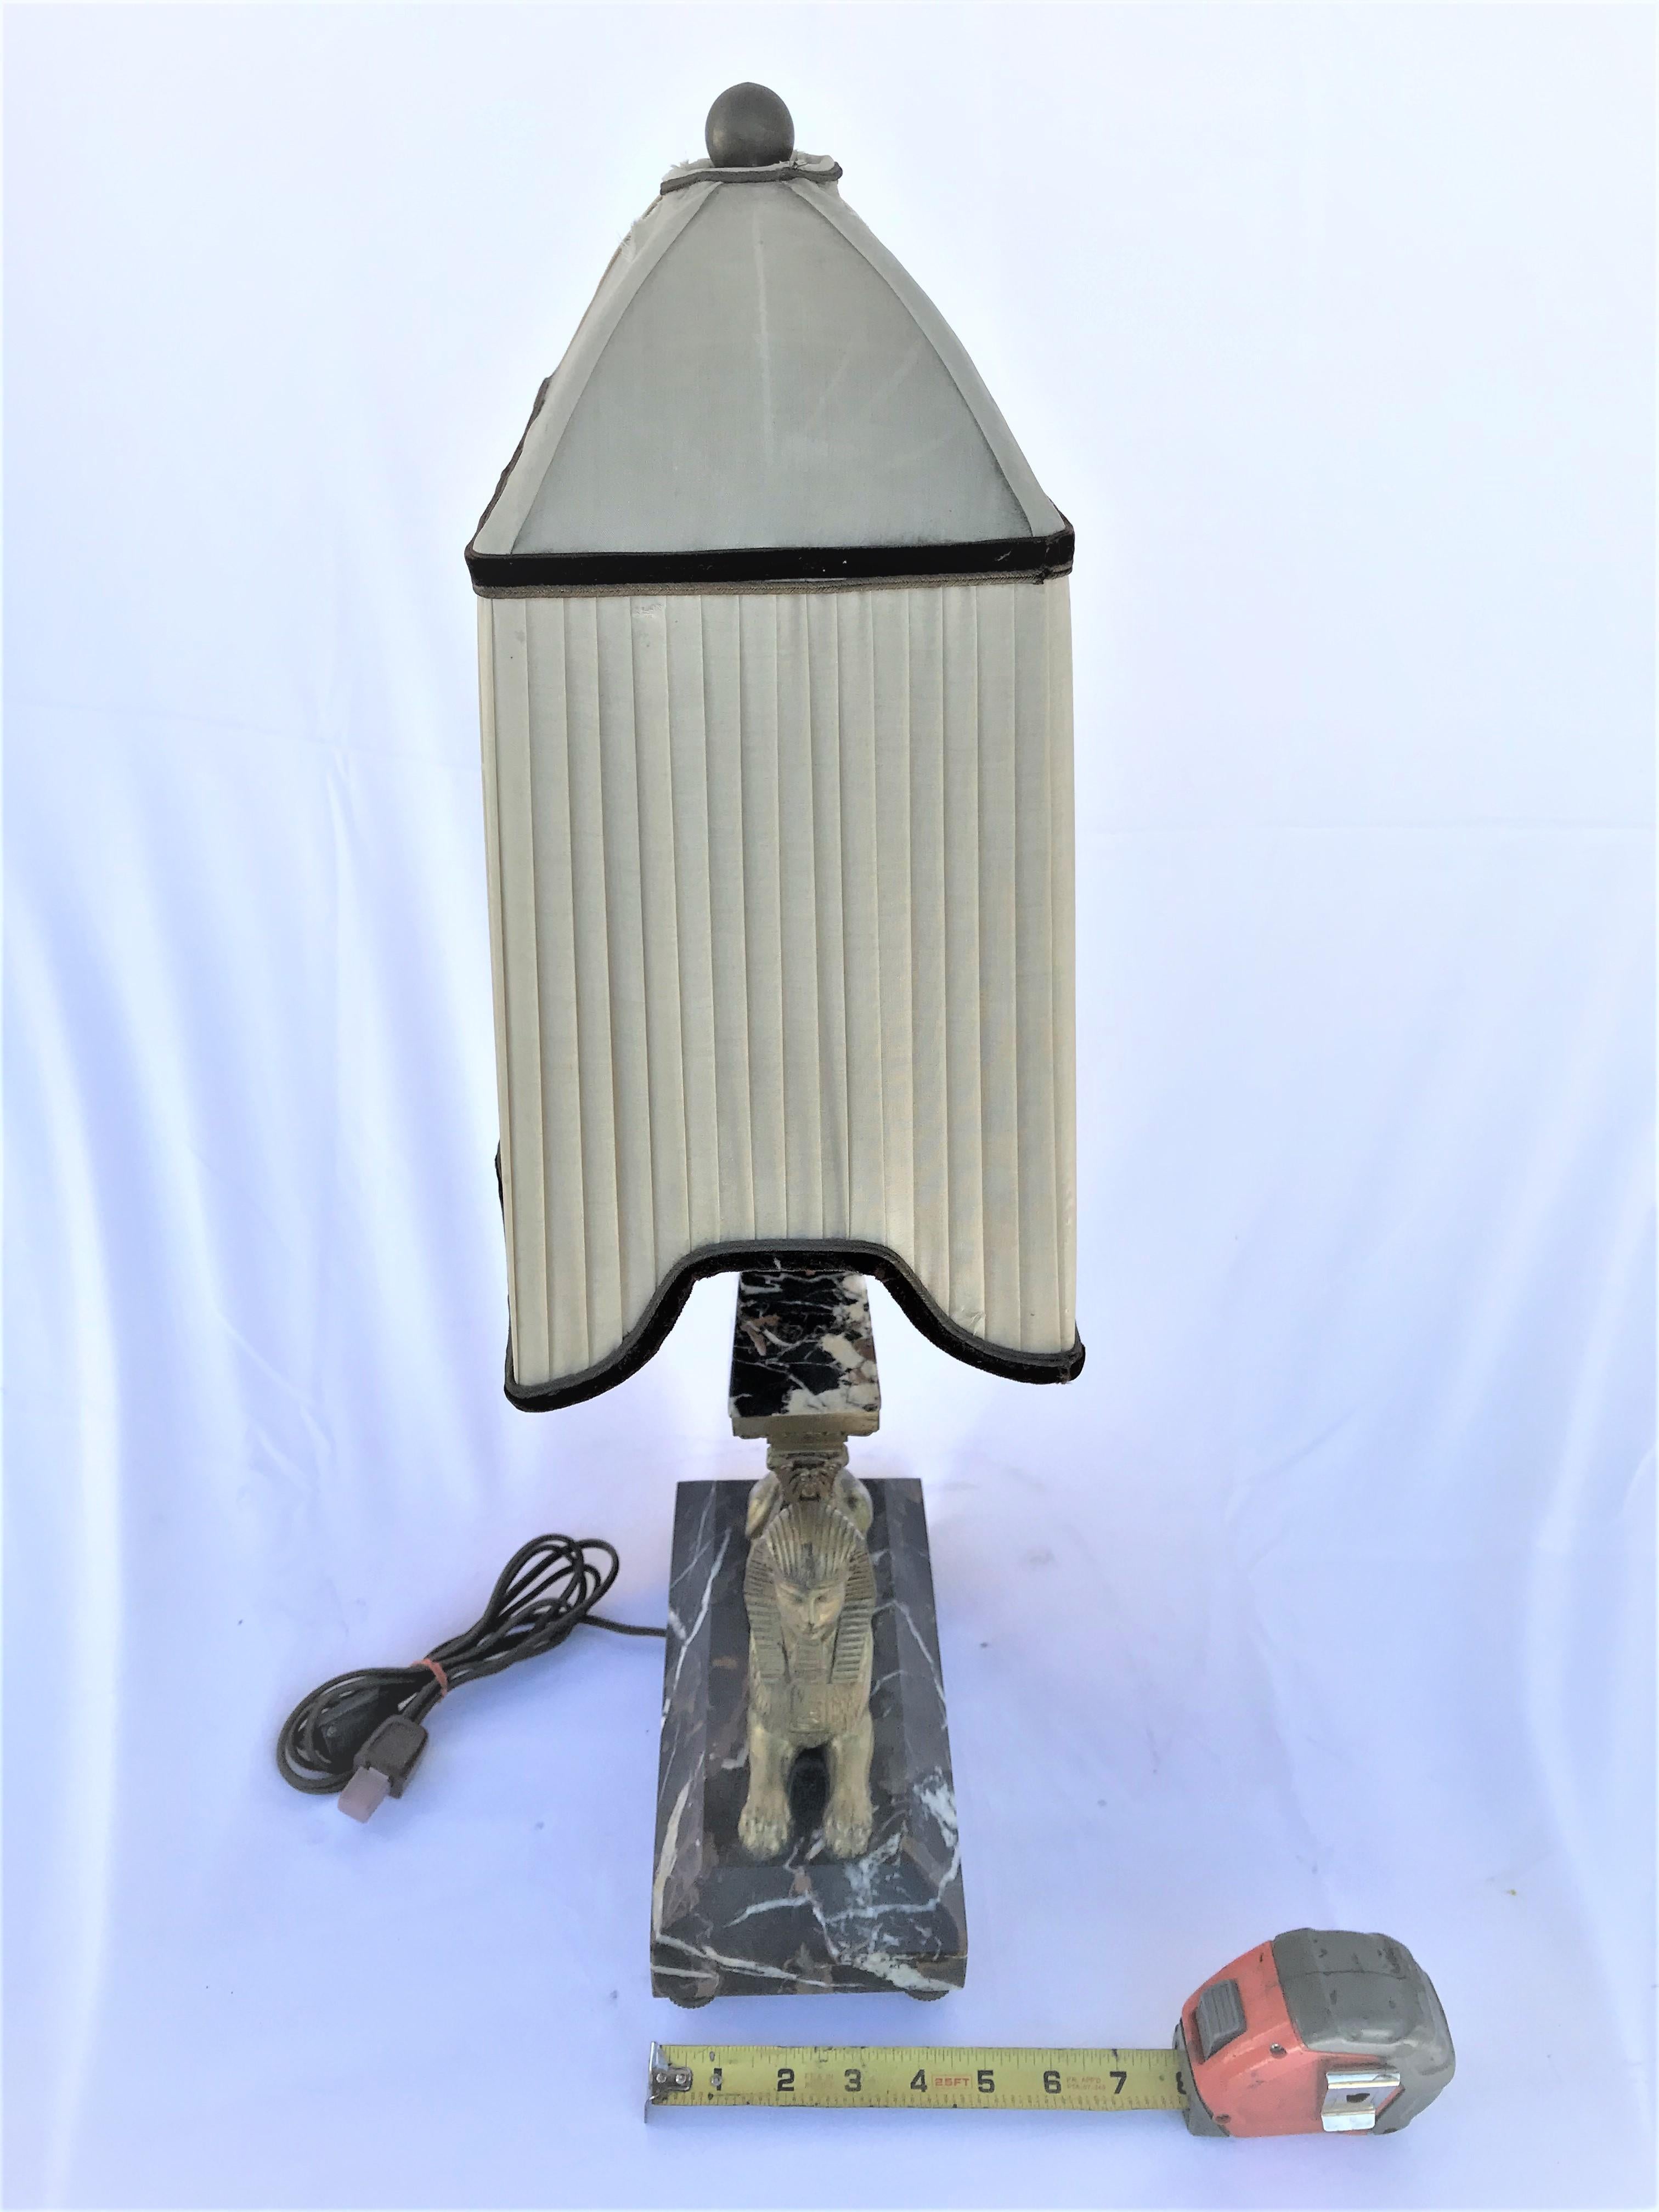 Sphynx lamp cast in bronze with doré gold finish. Has original linen shade. With marble base and obelisk post. Shade is in the shape of a tent with black borders. Small damage to shade on top. Really looks great when lit up at night. This item